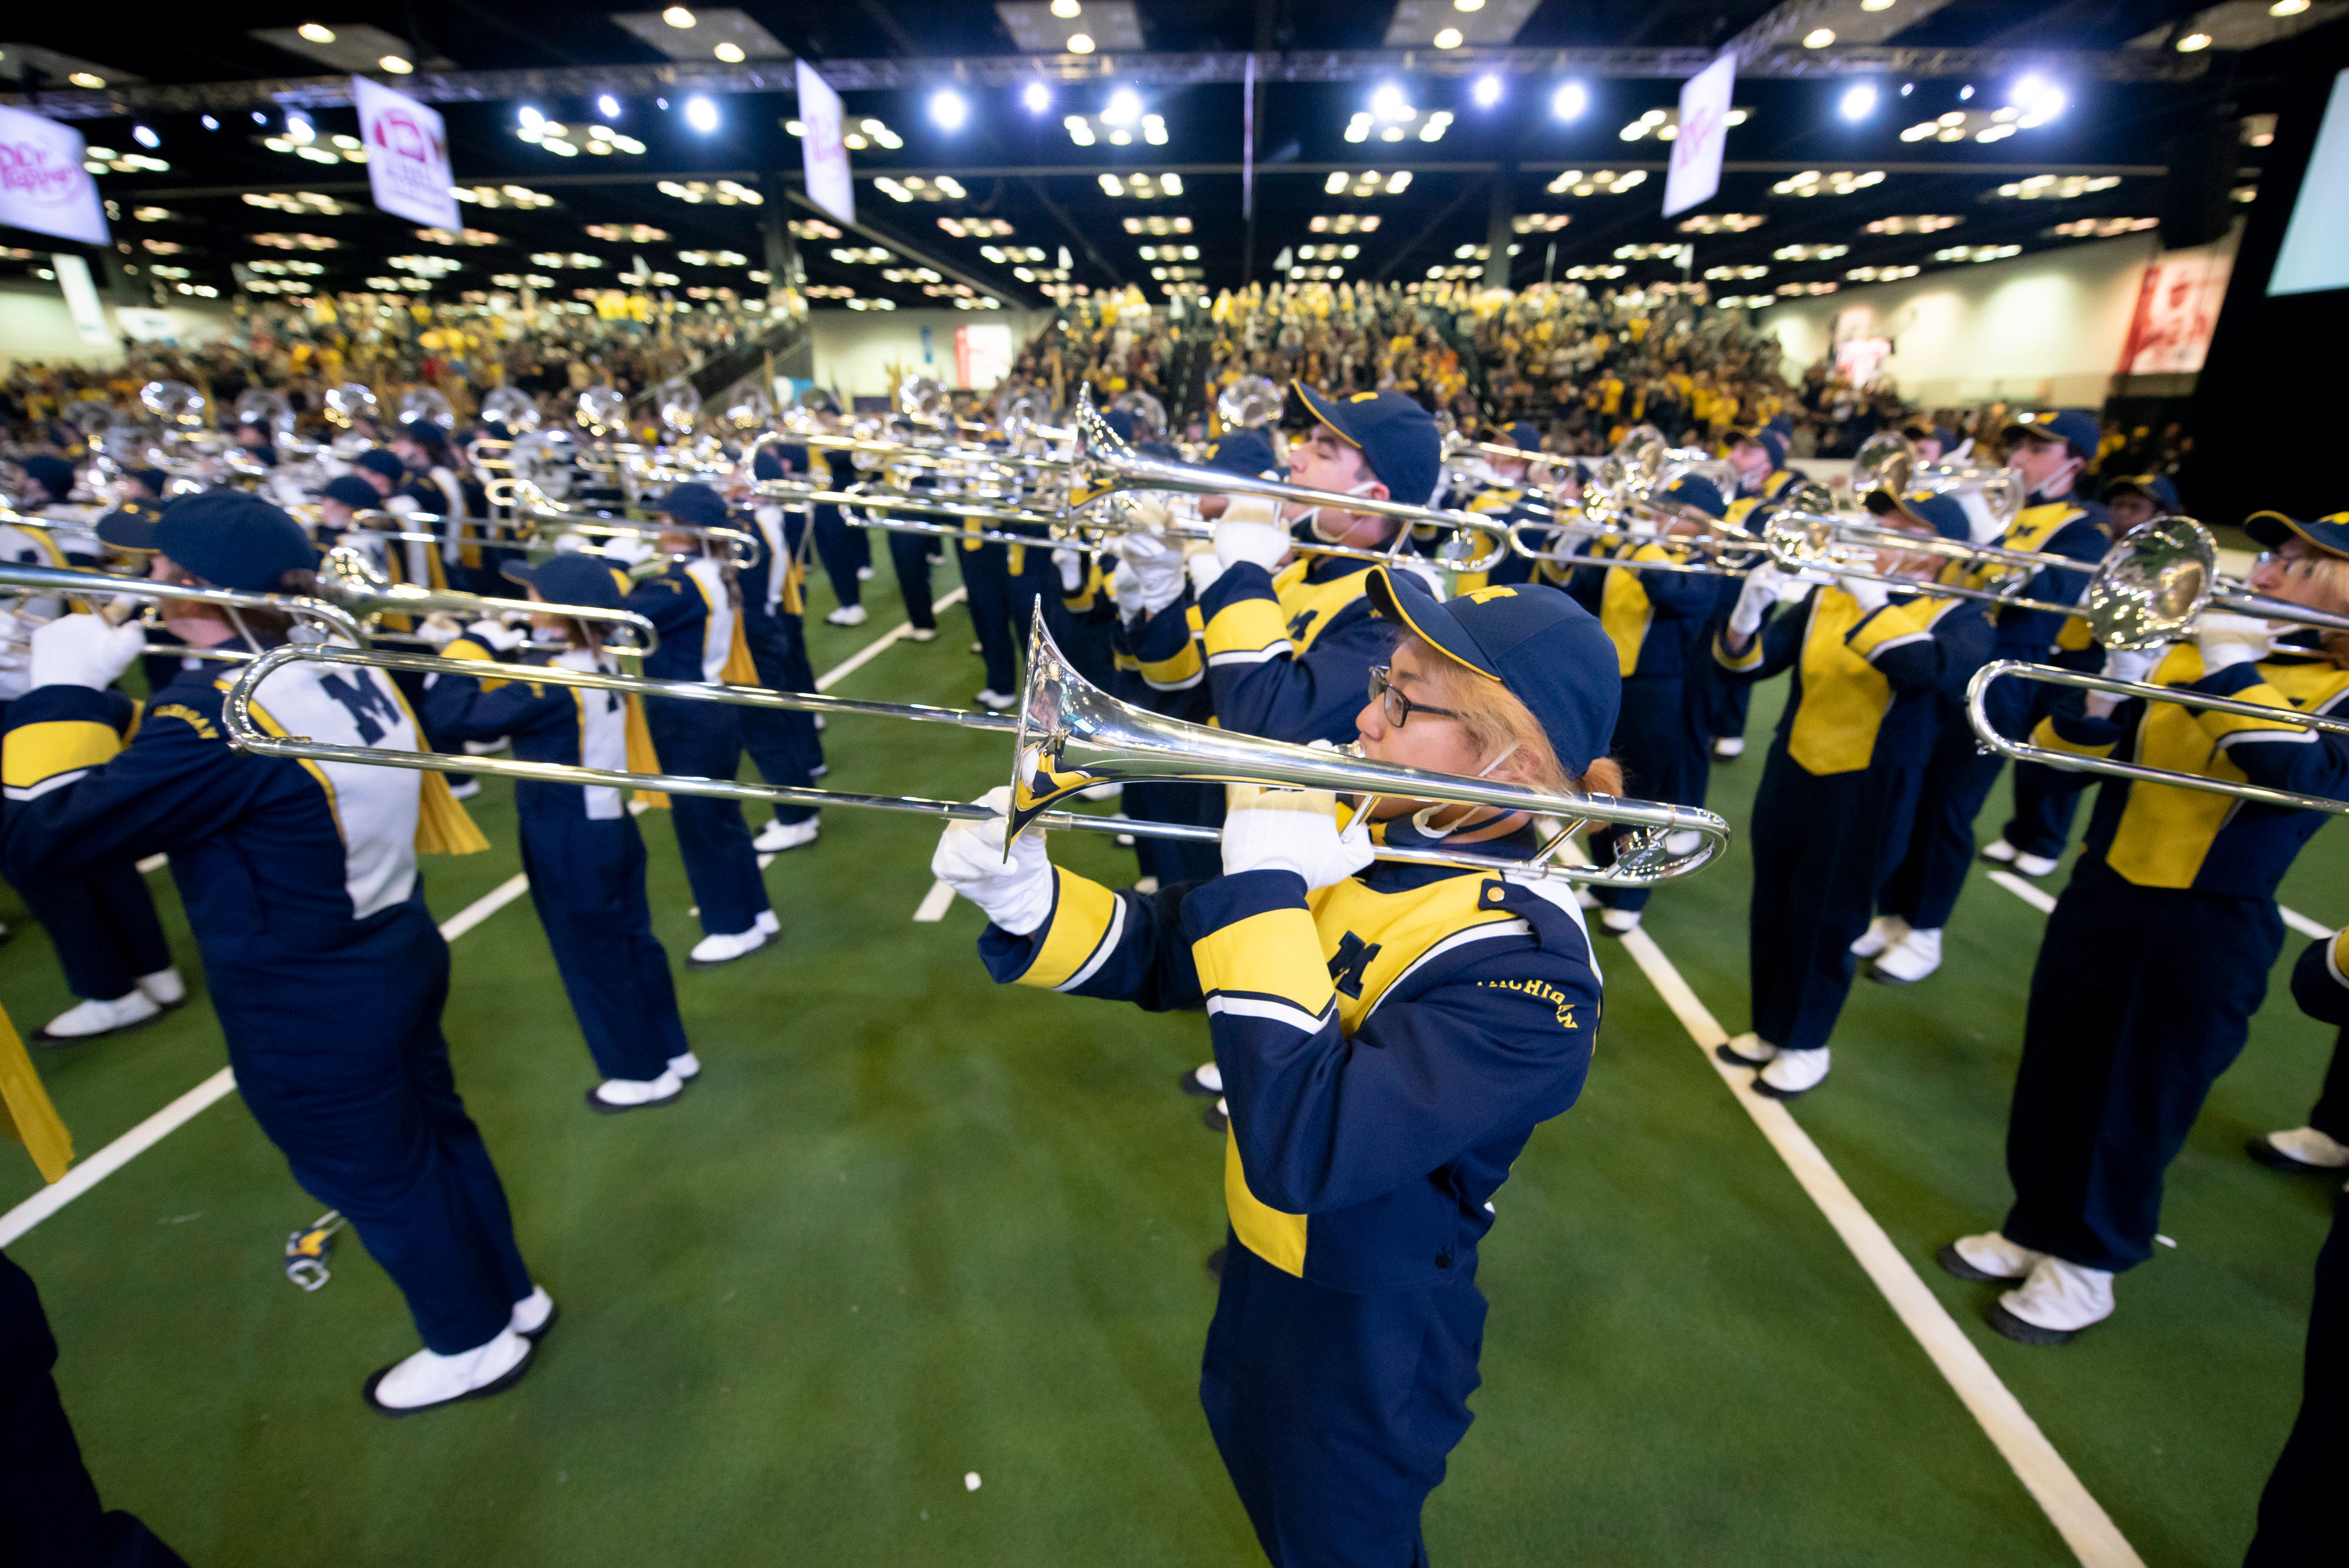 The Michigan Marching Band performs at the Fan Fest at the Indiana Convention Center, before the start of the Big Ten championship game.